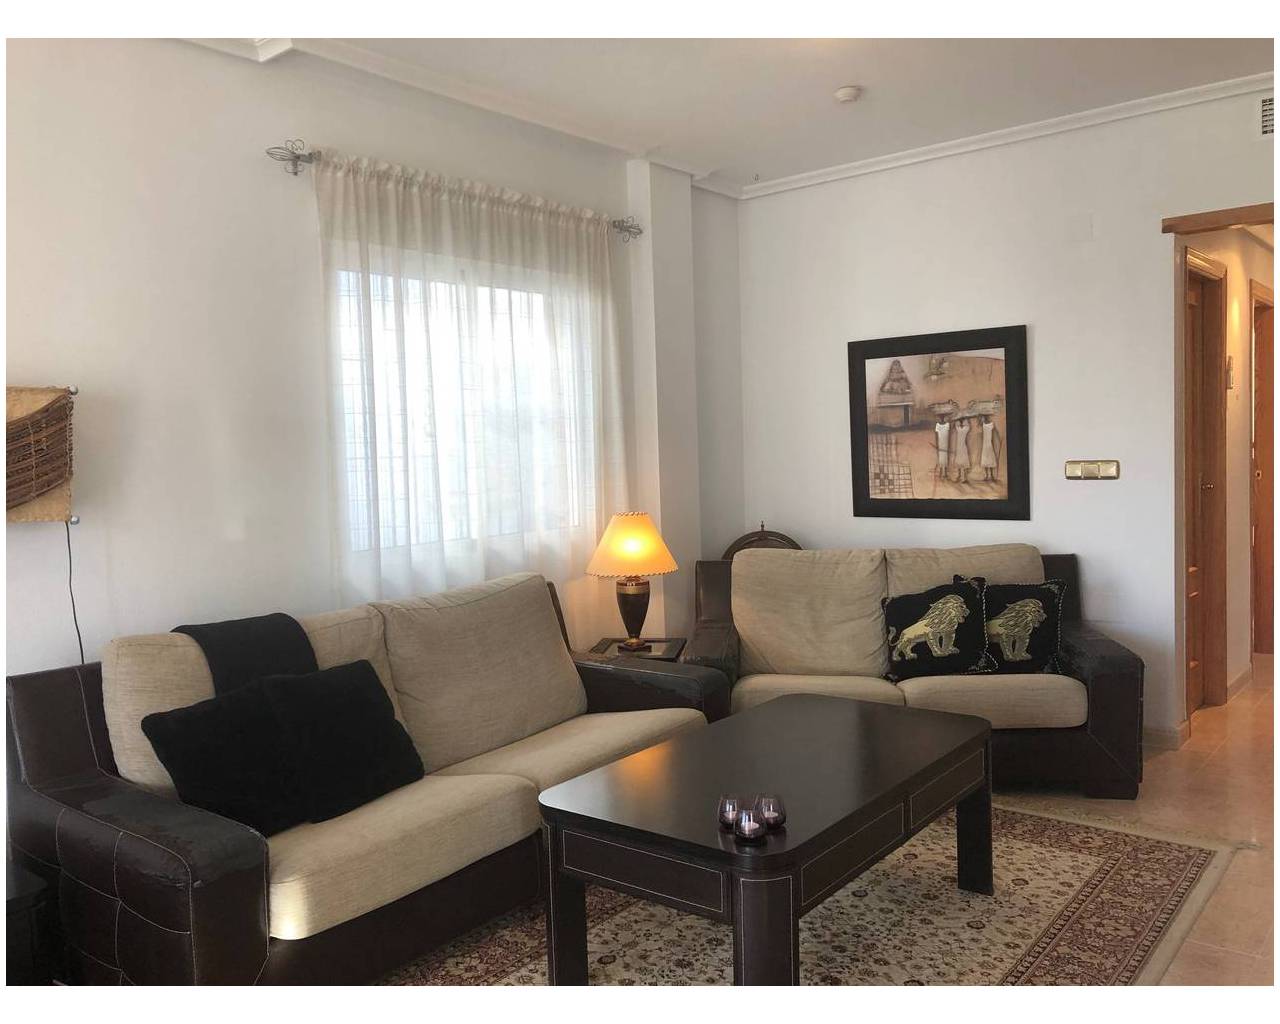 chaise lounge in bright living room of this el raso property for sale from zebra homes real etstate guardamar